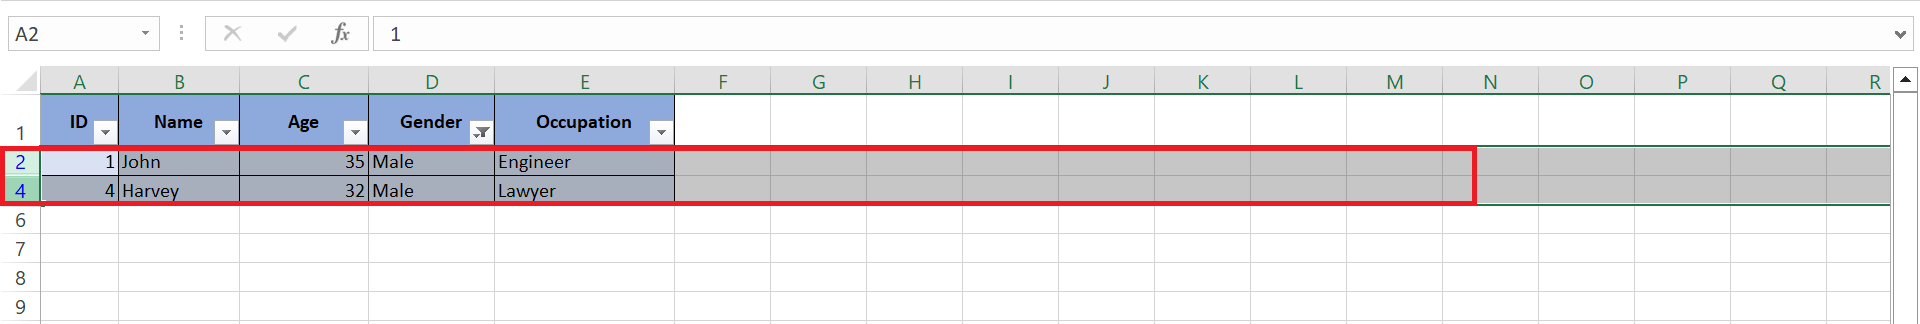 How to Delete Rows in Excel